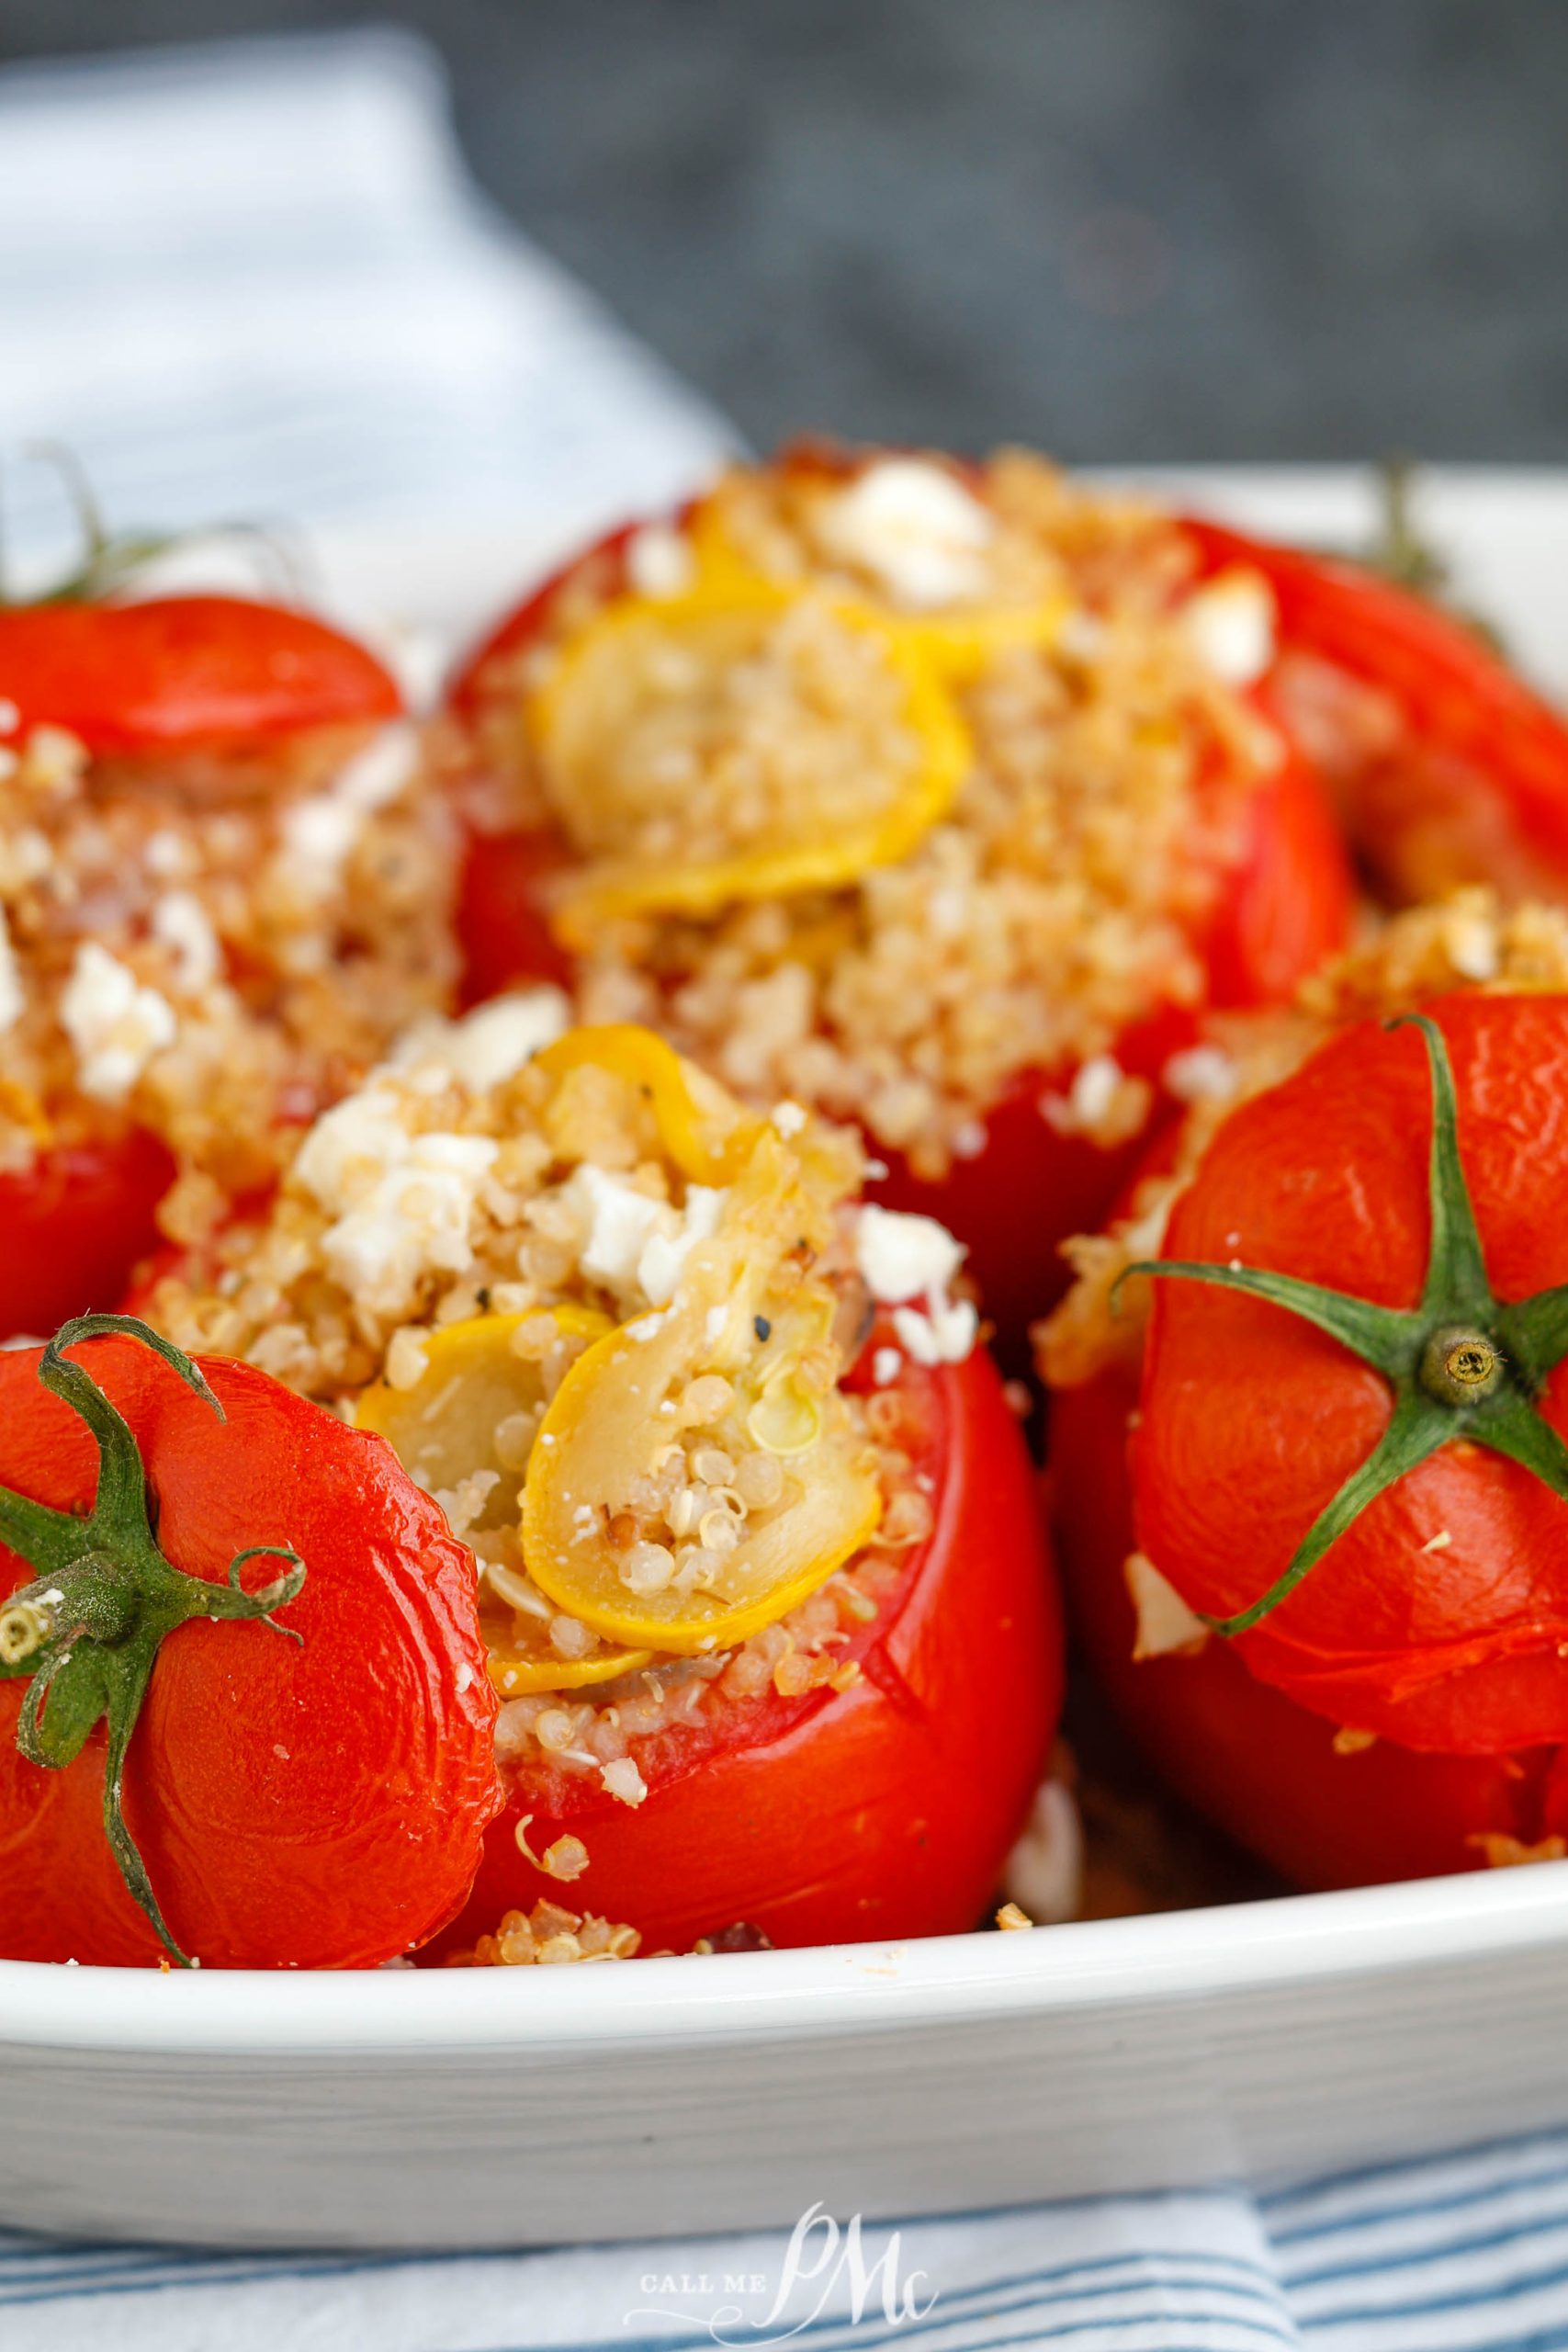 Quinoa stuffed red tomatoes in a dish.